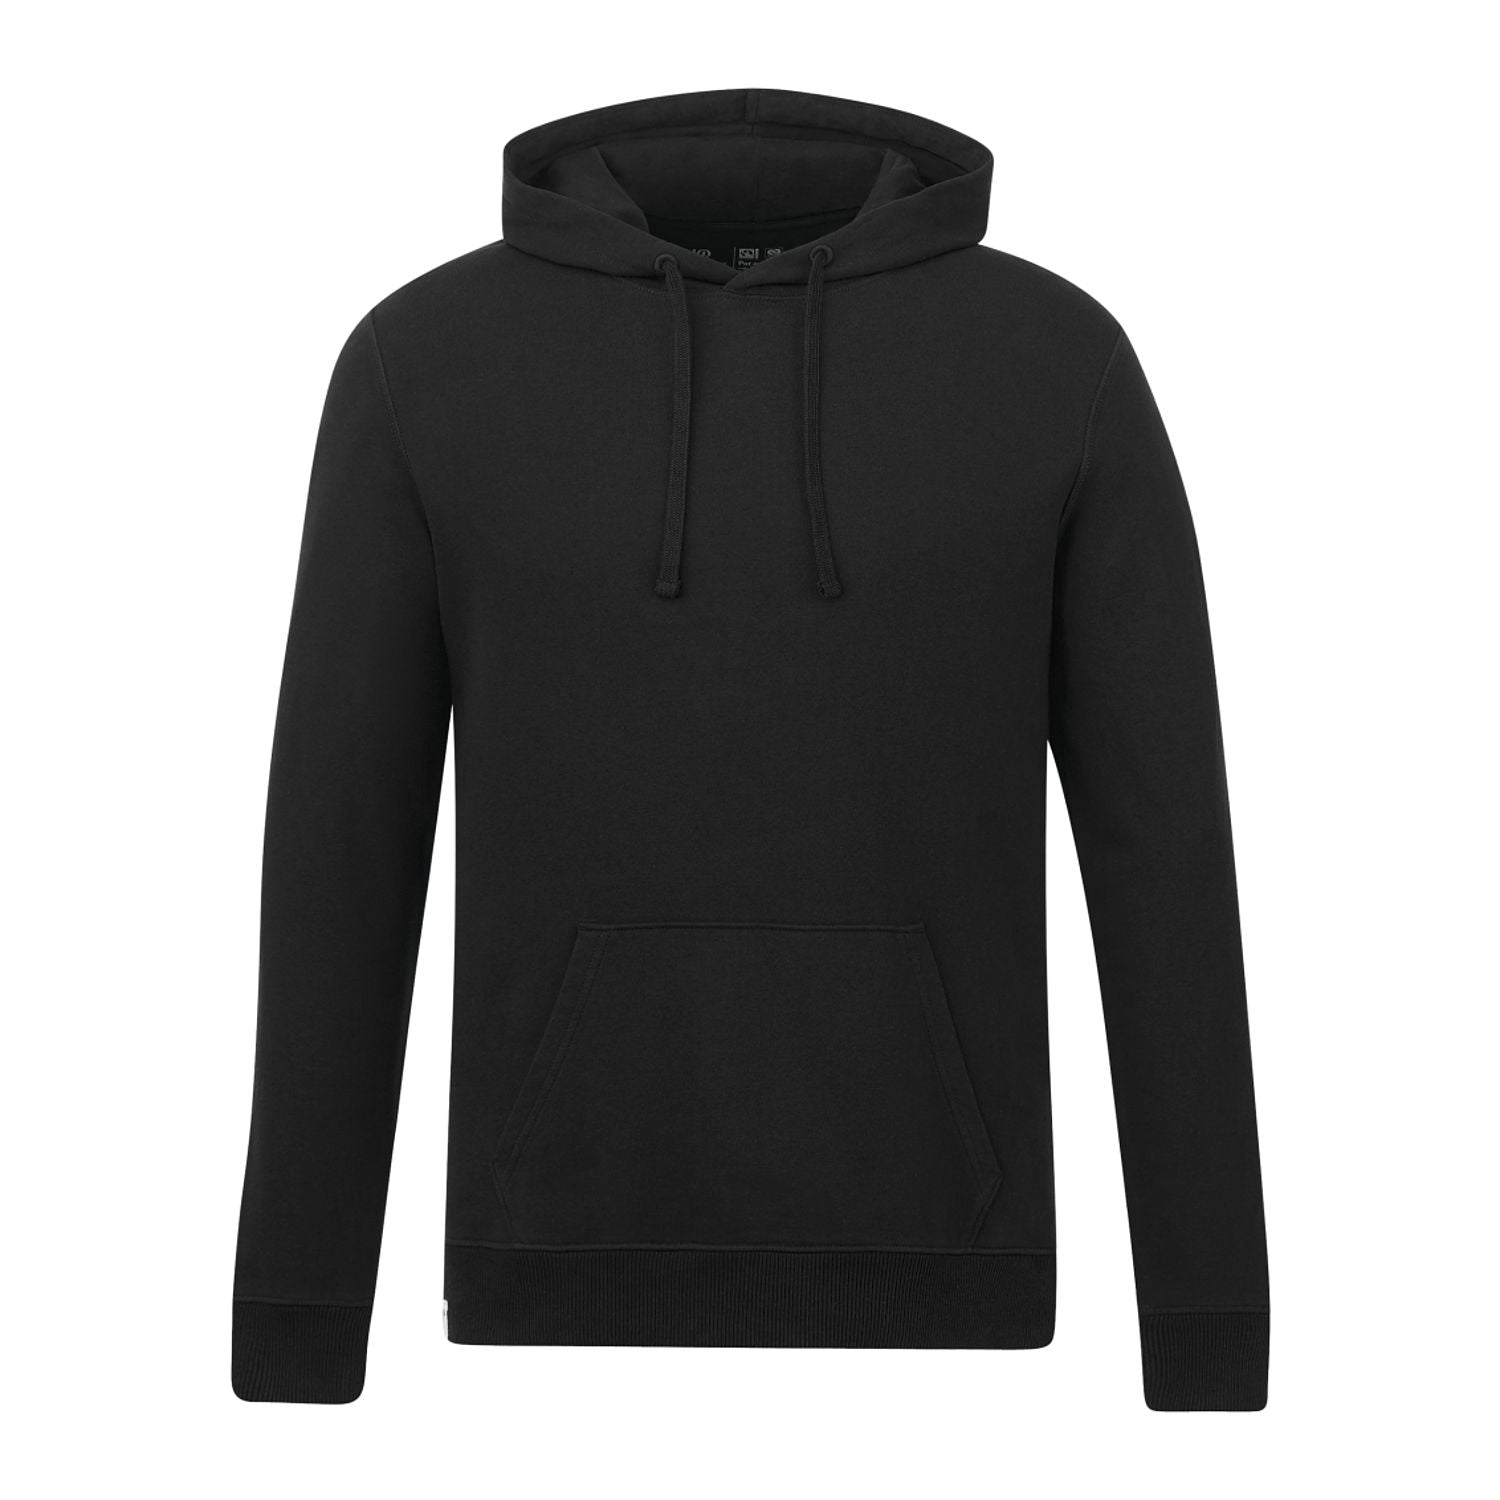 Customizable Tentree men's organic cotton french terry classic hoodie in black.